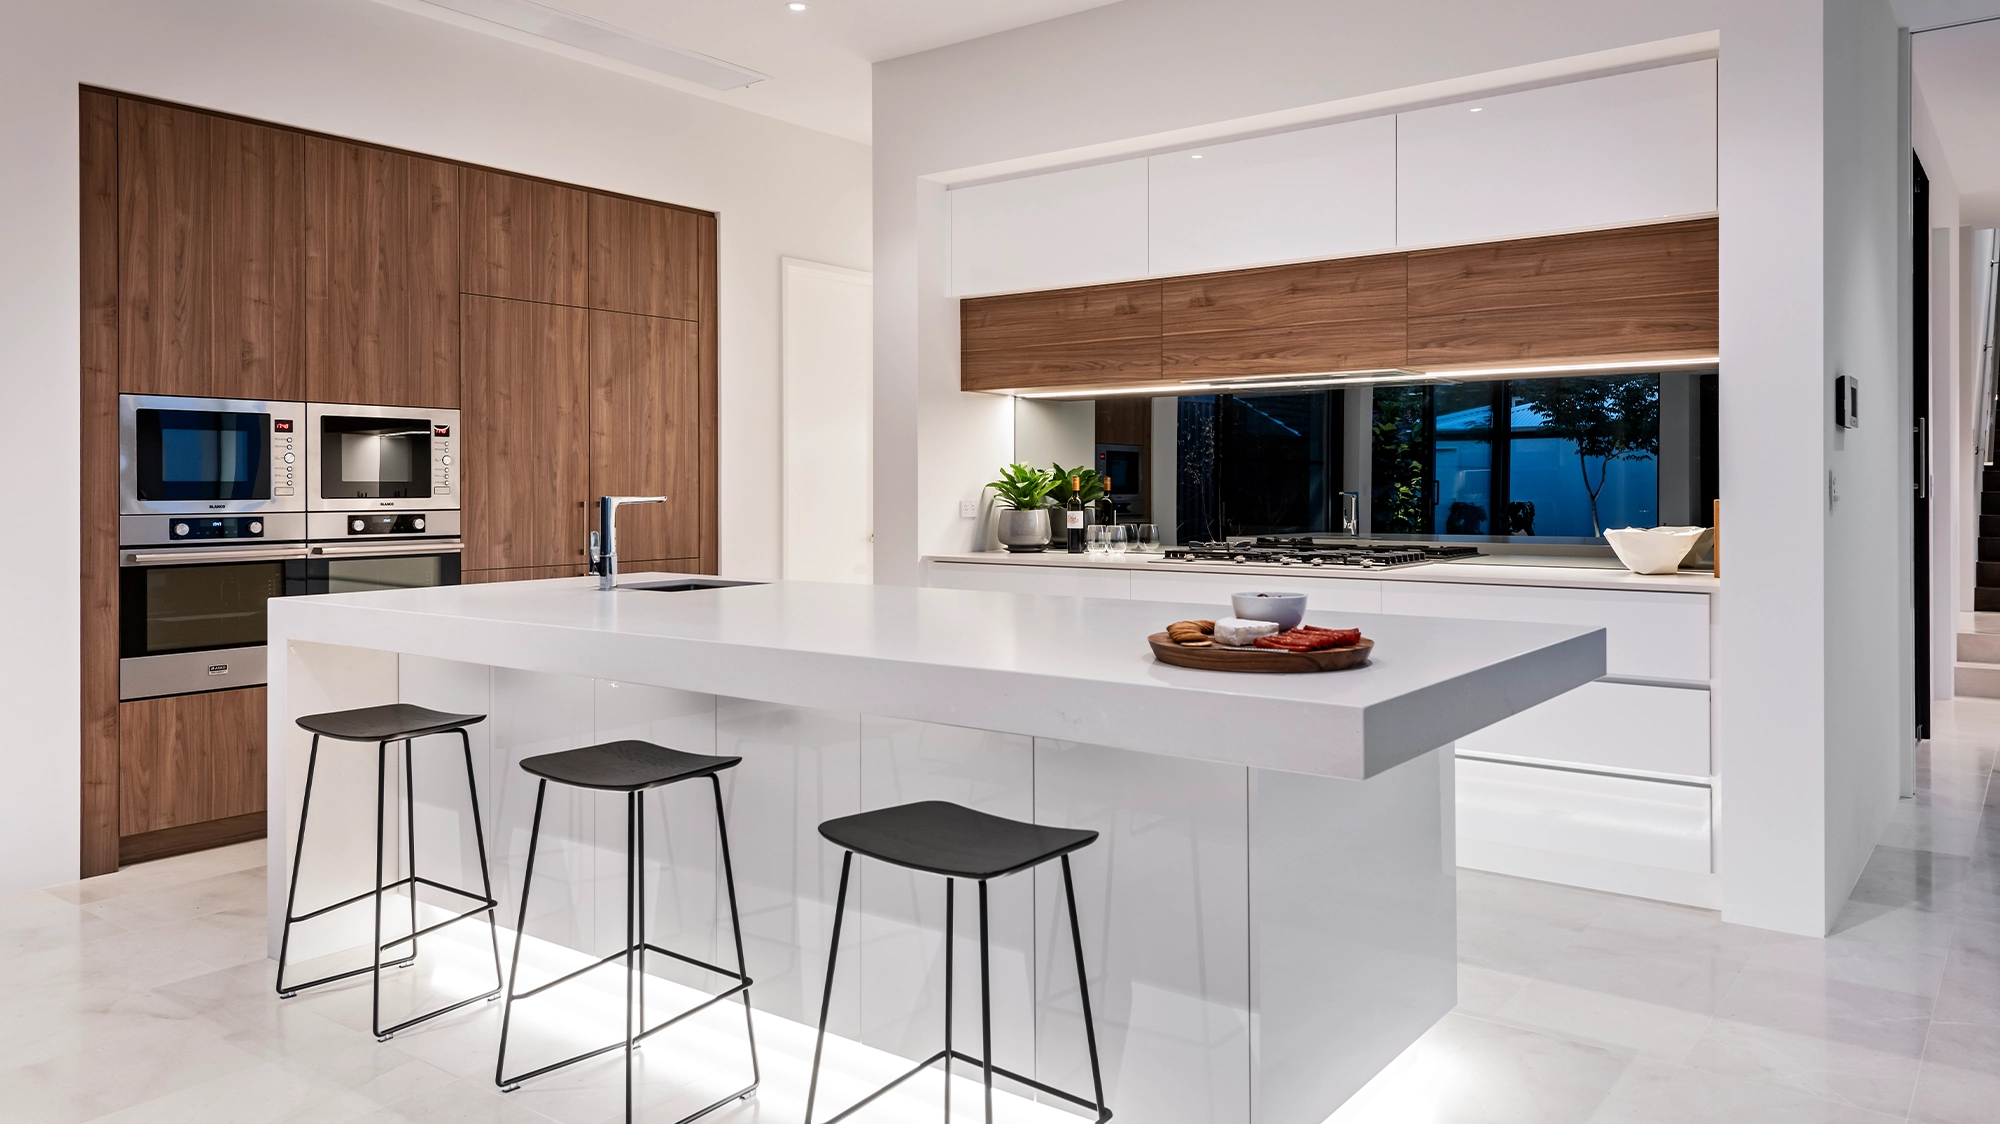 Functional Kitchen Design - Luxury Home Designs Perth - Averna Homes